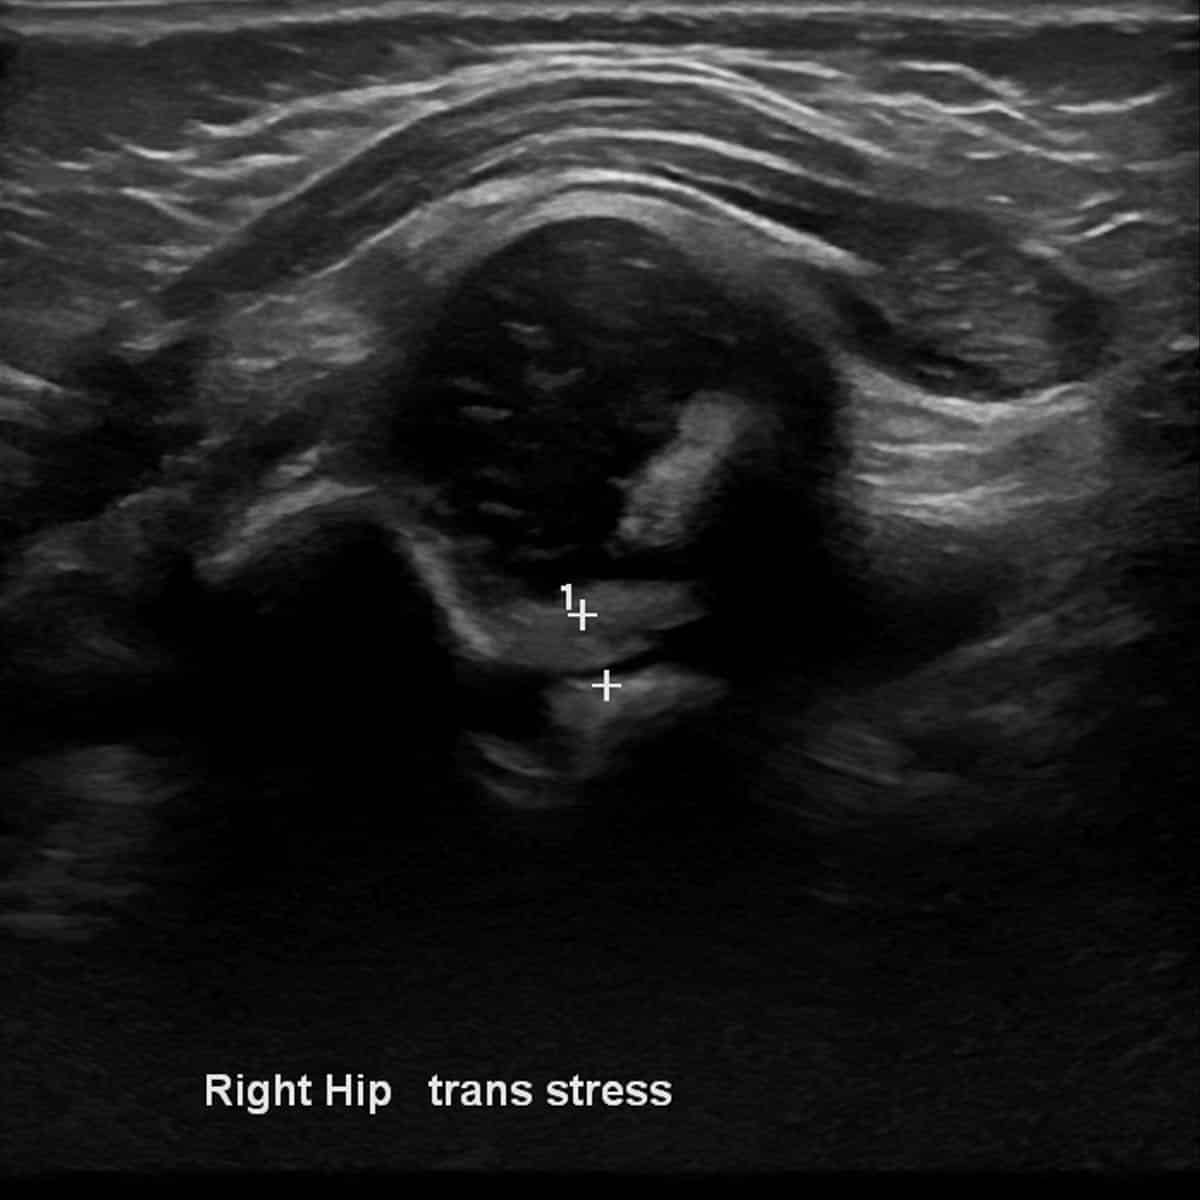 ultrasound of an infant's right hip